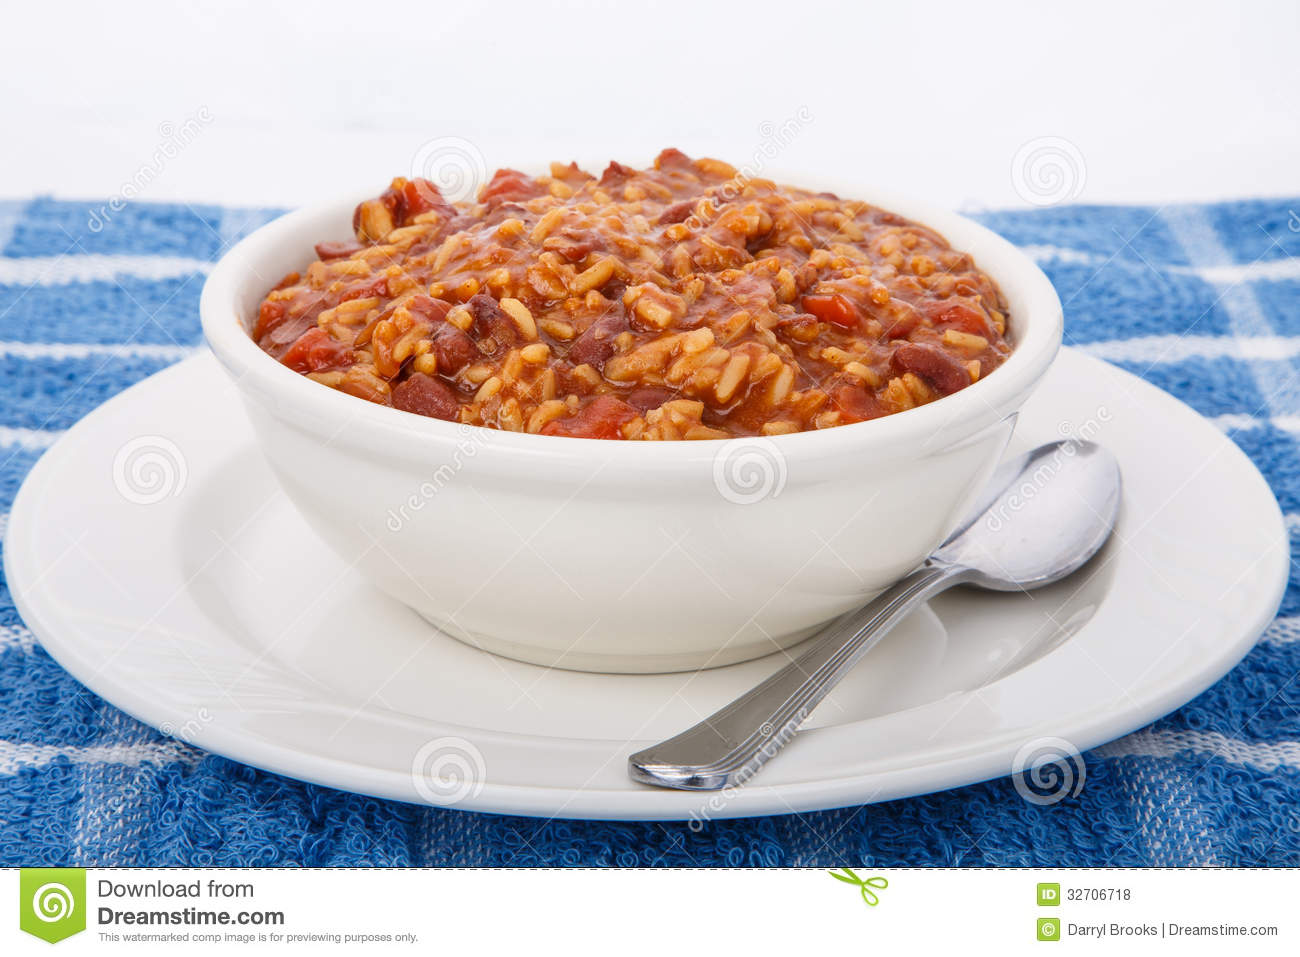 Red Beans And Rice In White Bowl With Spoon Royalty Free Stock Photos